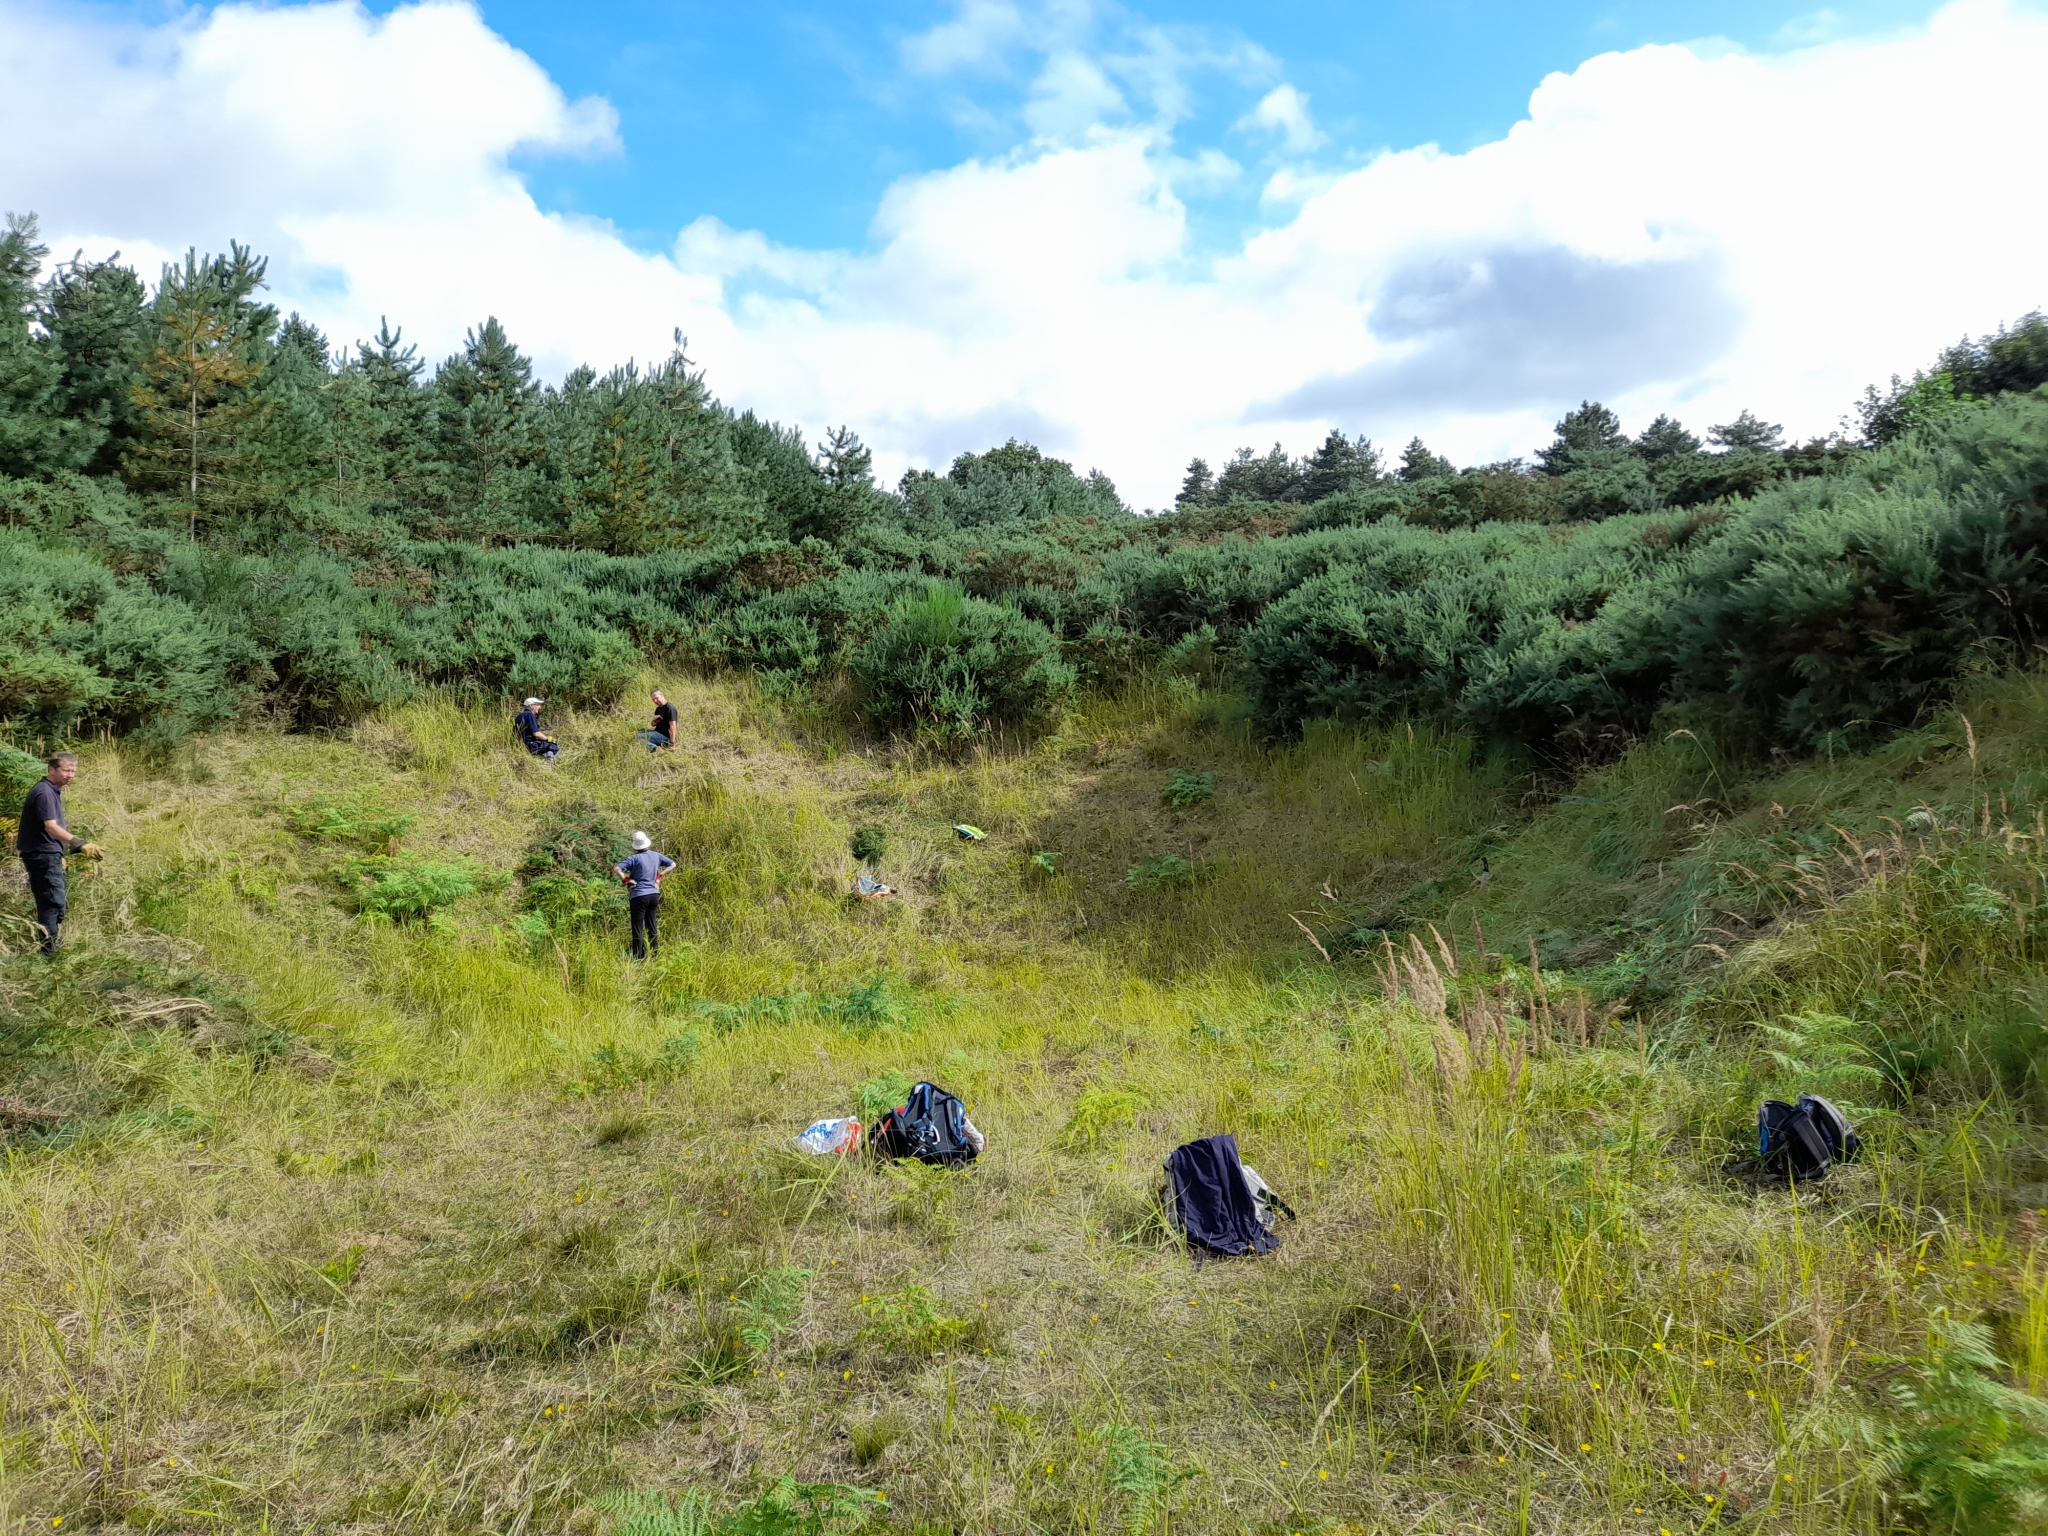 A photo from the FoTF Conservation Event - August 2021 - Maintenance tasks at Mildenhall Mugwort Pit & Mildenhall Warren Lodge : Volunteers work on the slope of the Mugworth pit clearing Gorse and vegetation